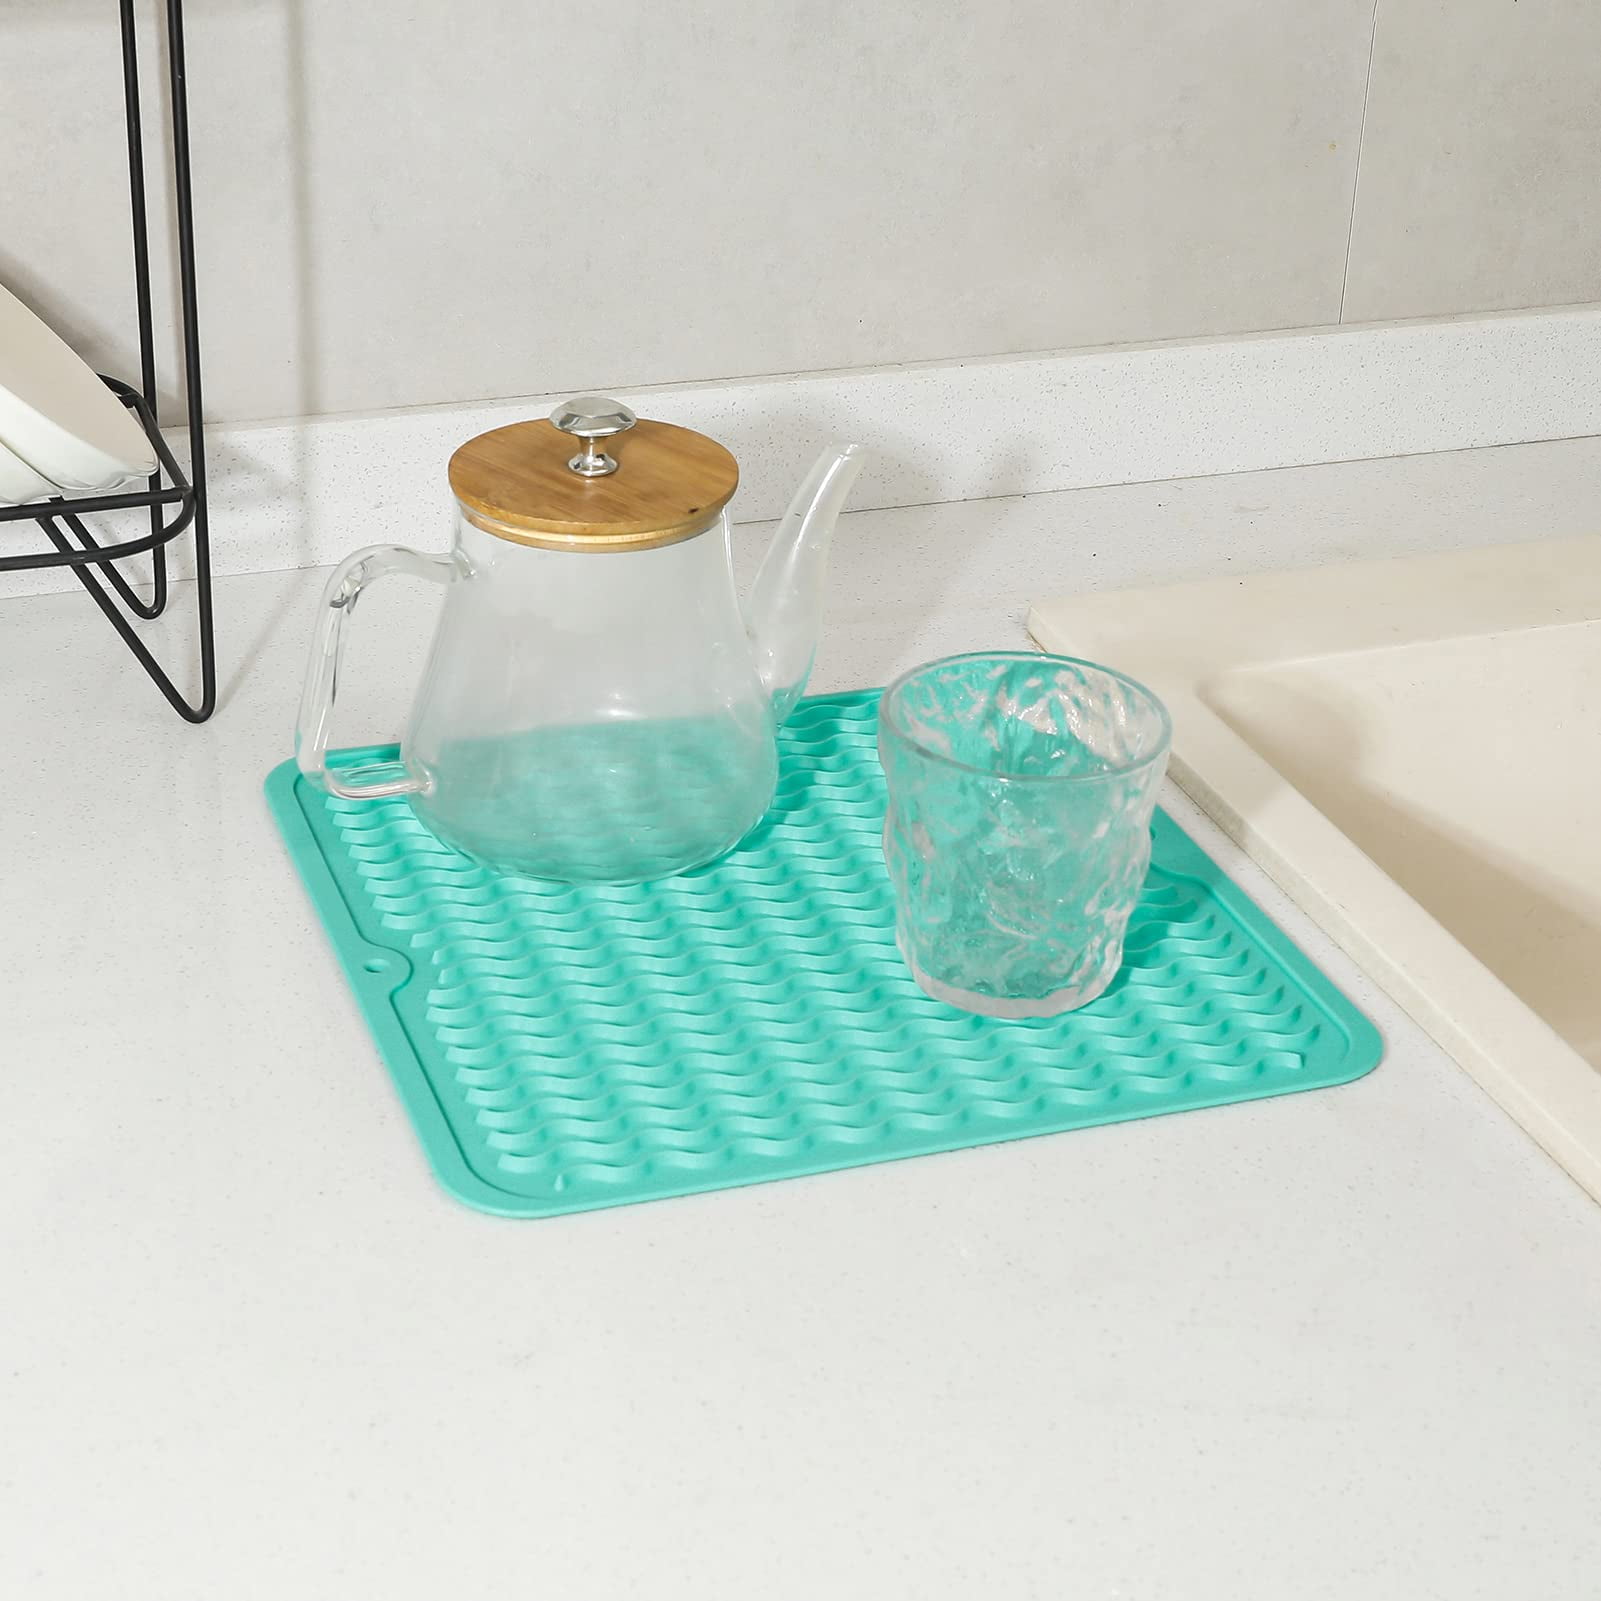 Chrlaon Silicone Dish Drying Mat Easy Clean for Kitchen Counter or Sink Pink